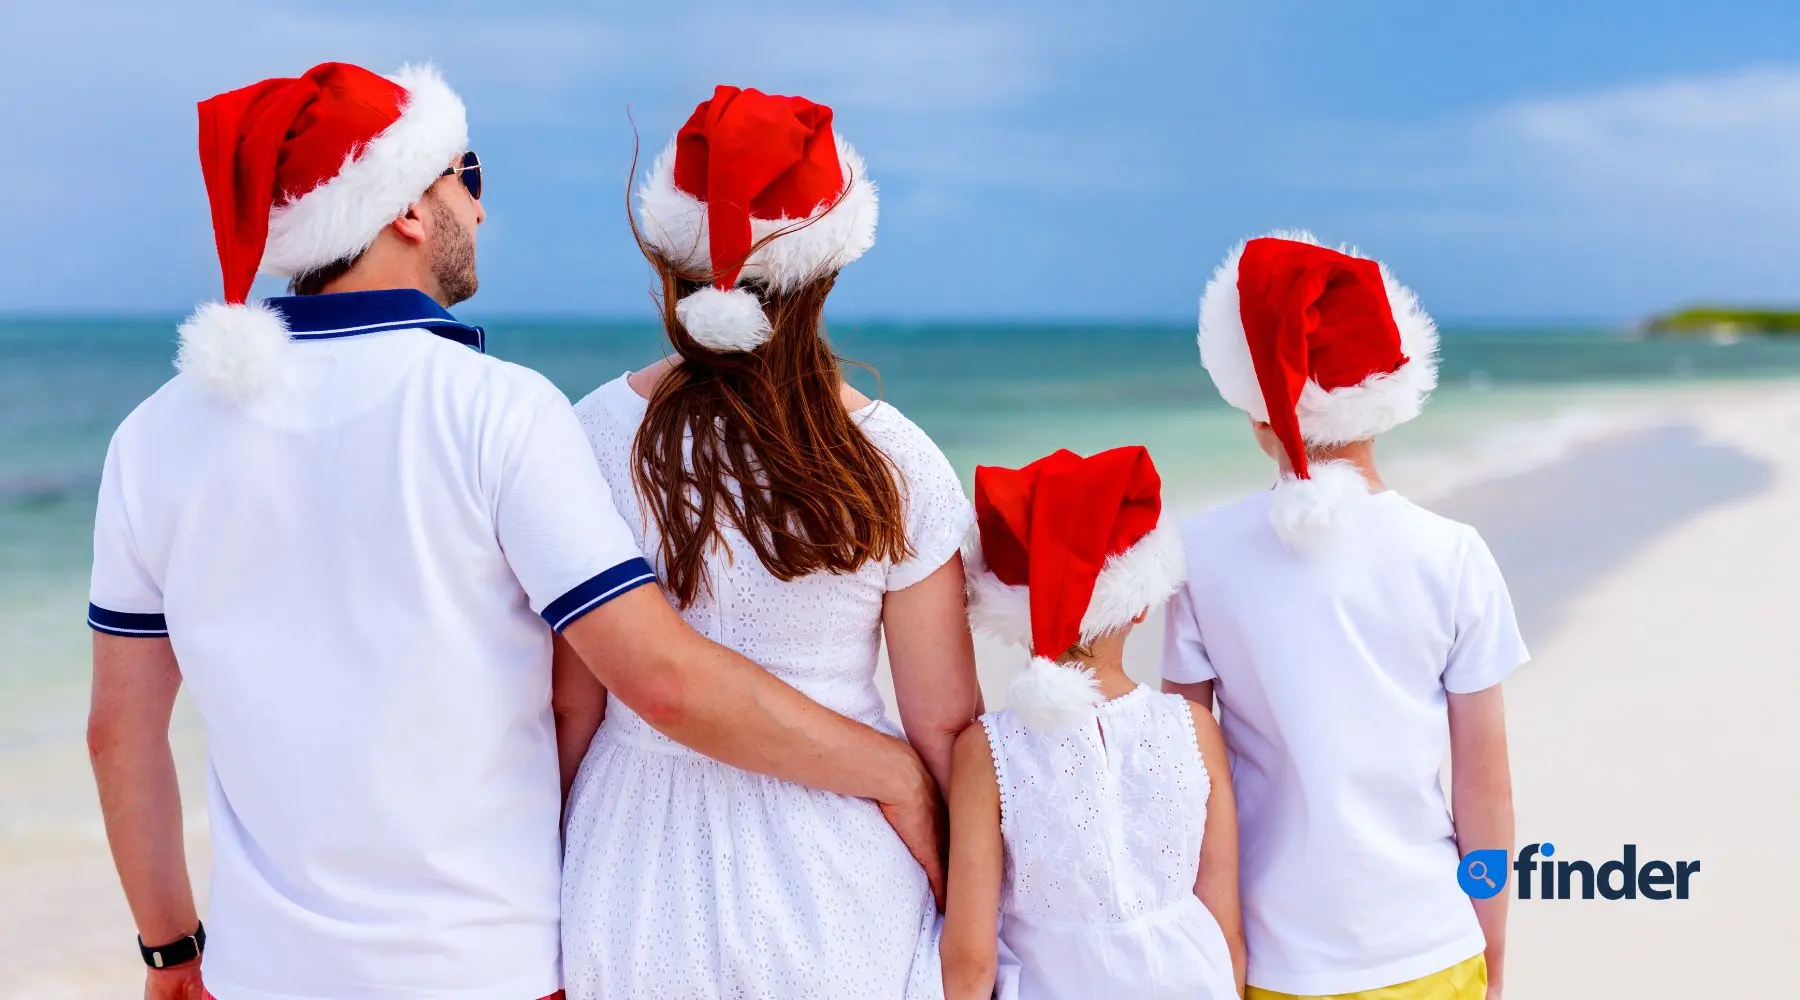 Get 15% off Travel Insurance with InsureandGo during the 12 Days of Holiday Offers